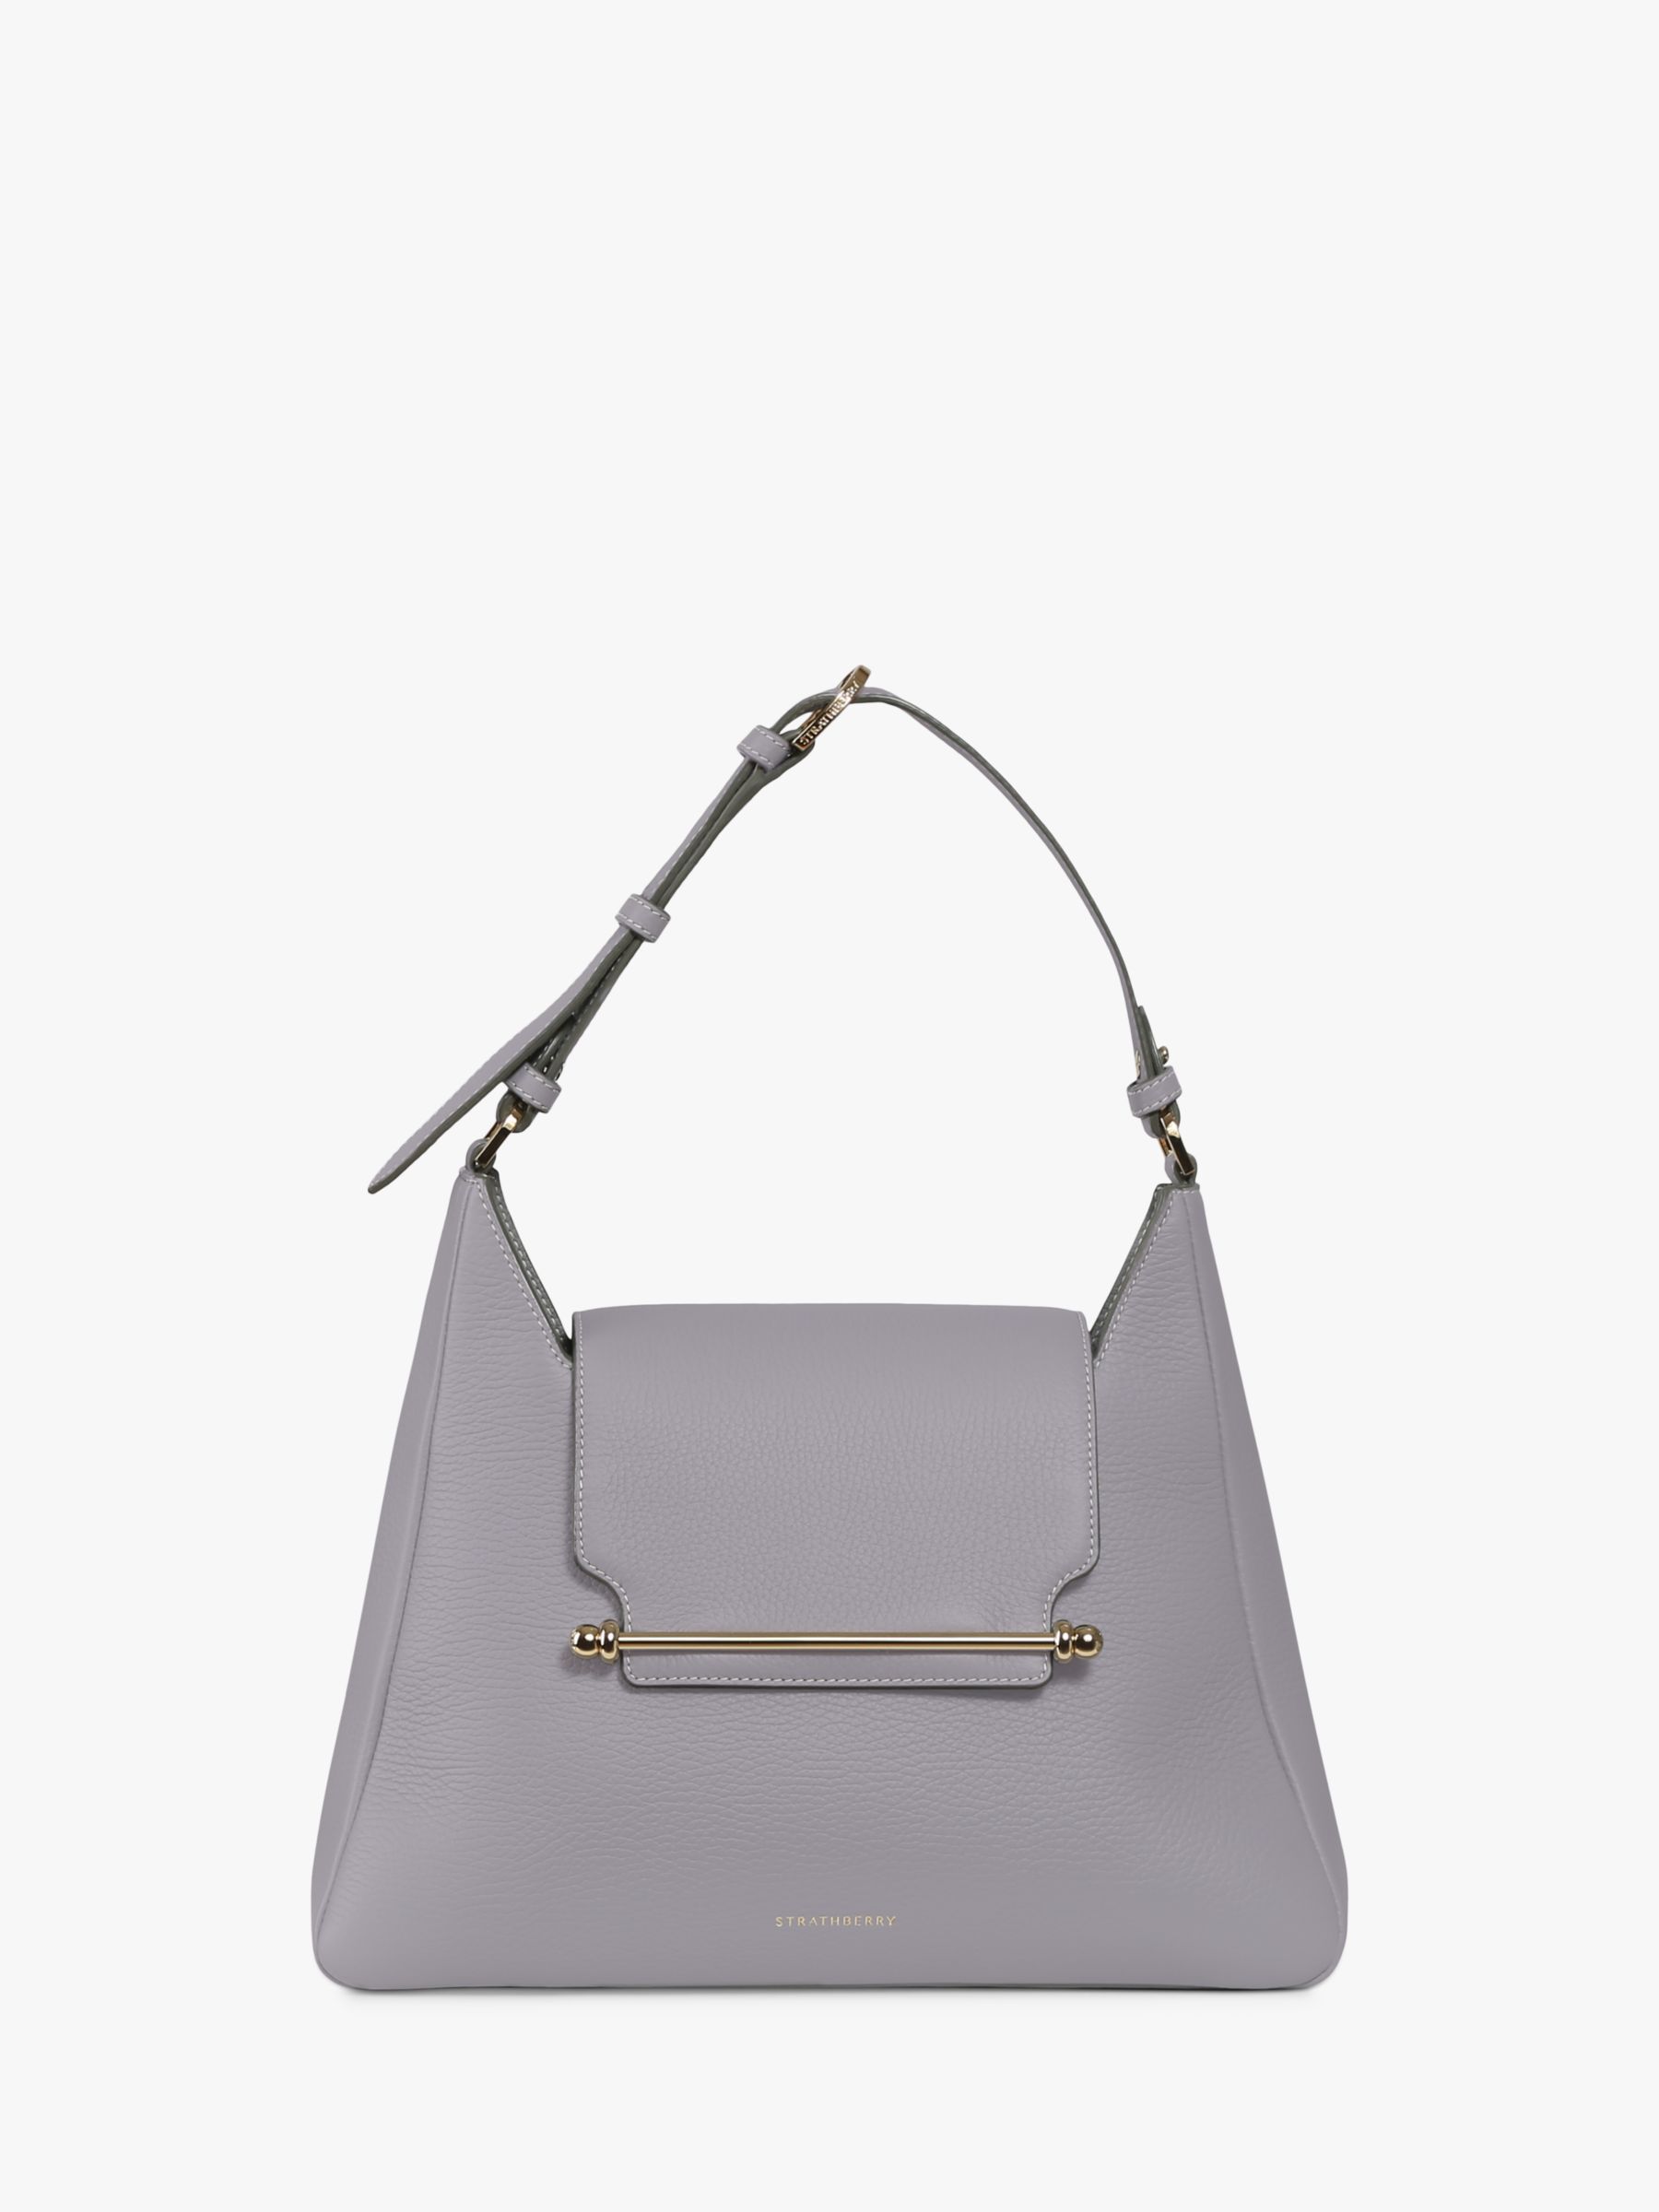 Strathberry Multrees Leather Hobo Bag, Frost Grey/Vanilla at John Lewis ...